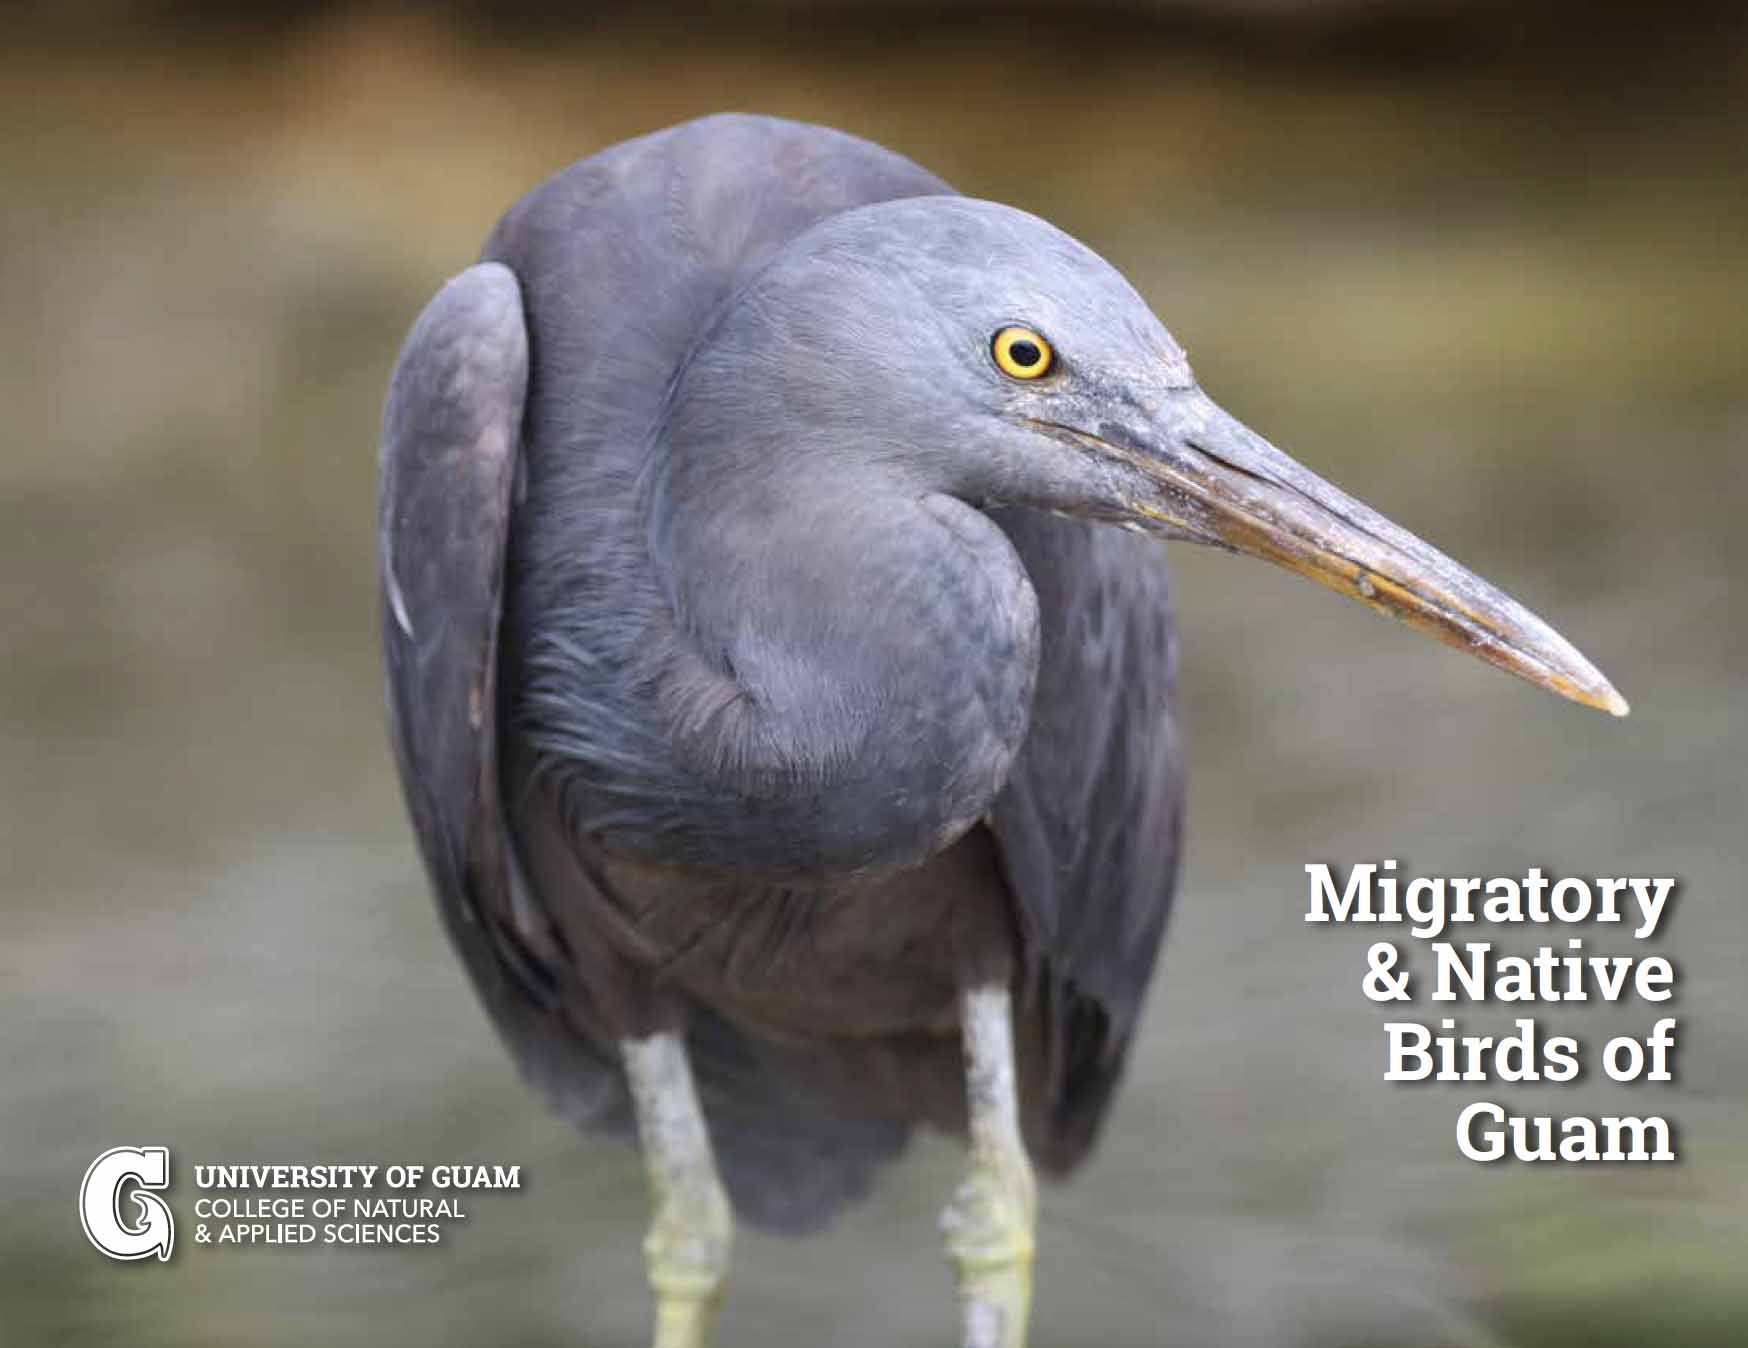 Thumbnail image for e-book on native and migratory birds of Guam